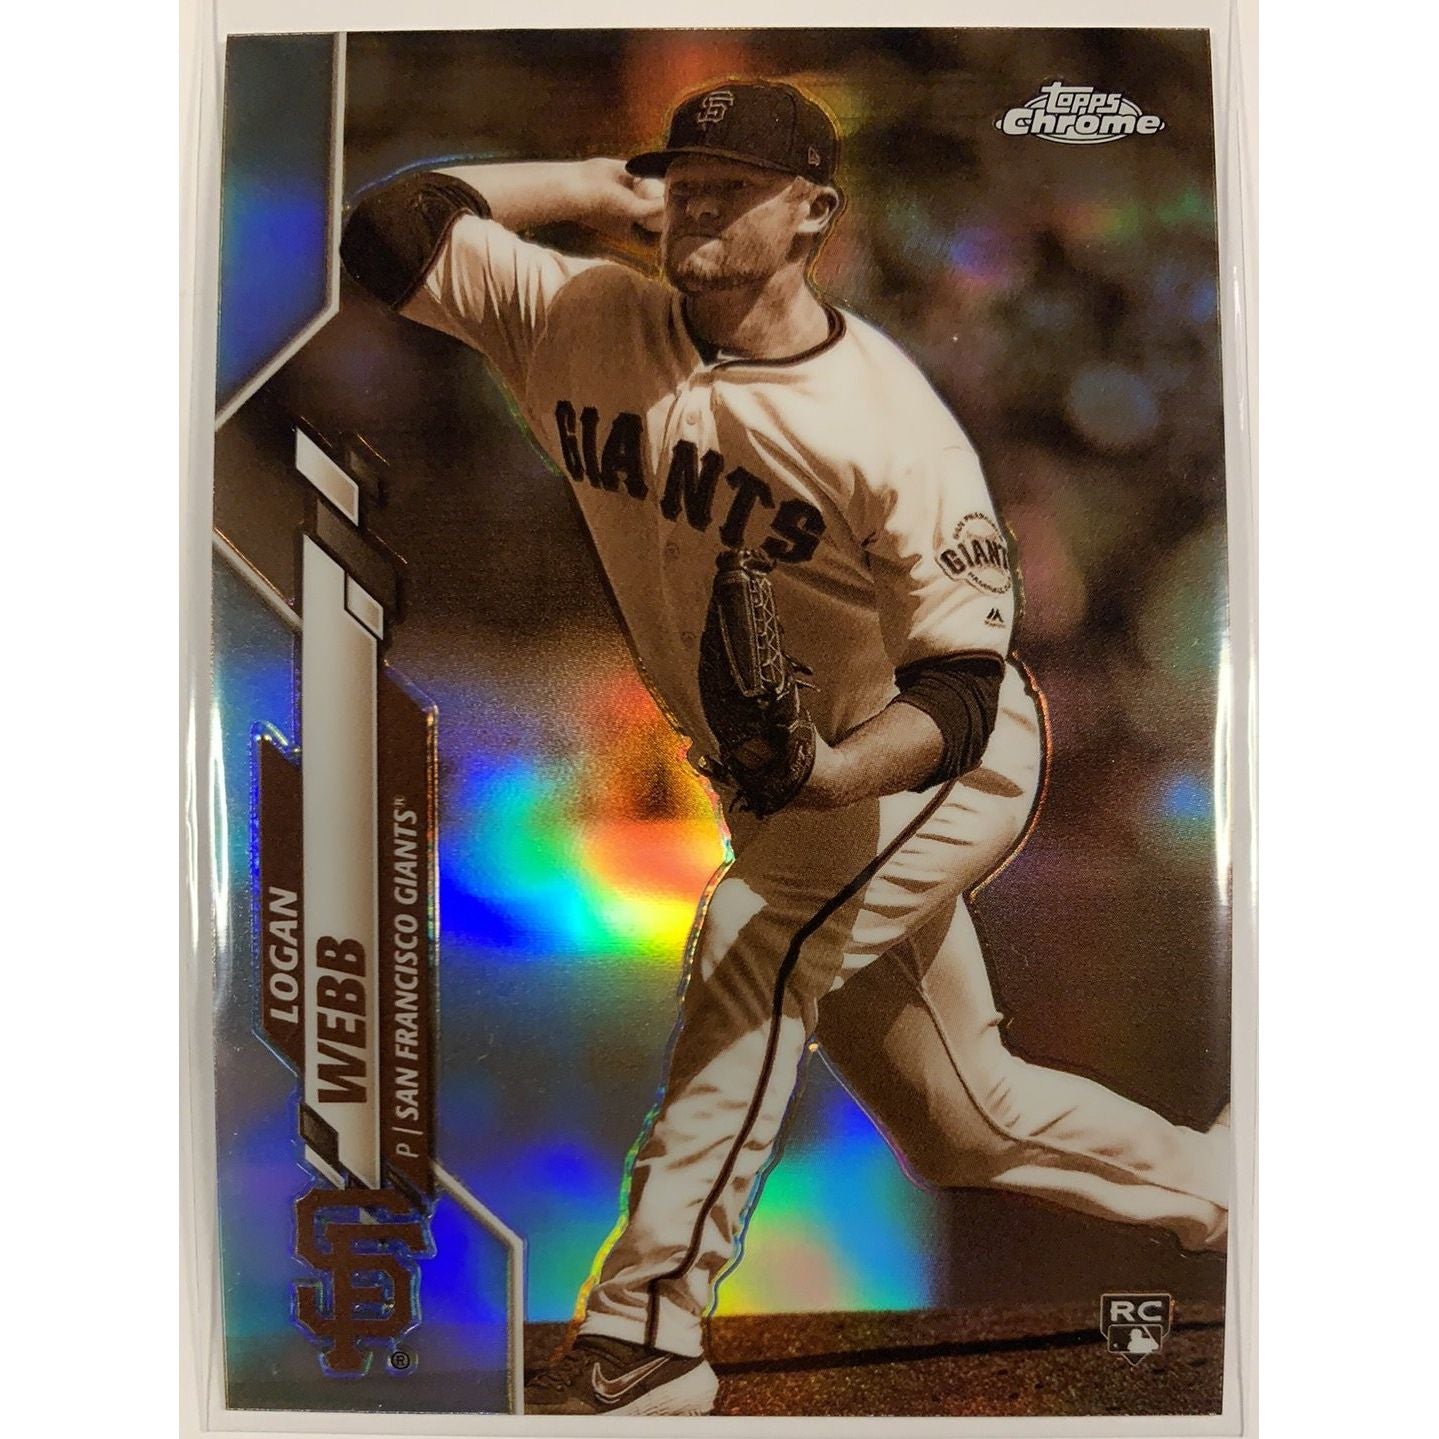  2020 Topps Chrome Logan Webb RC Sepia Refractor  Local Legends Cards & Collectibles